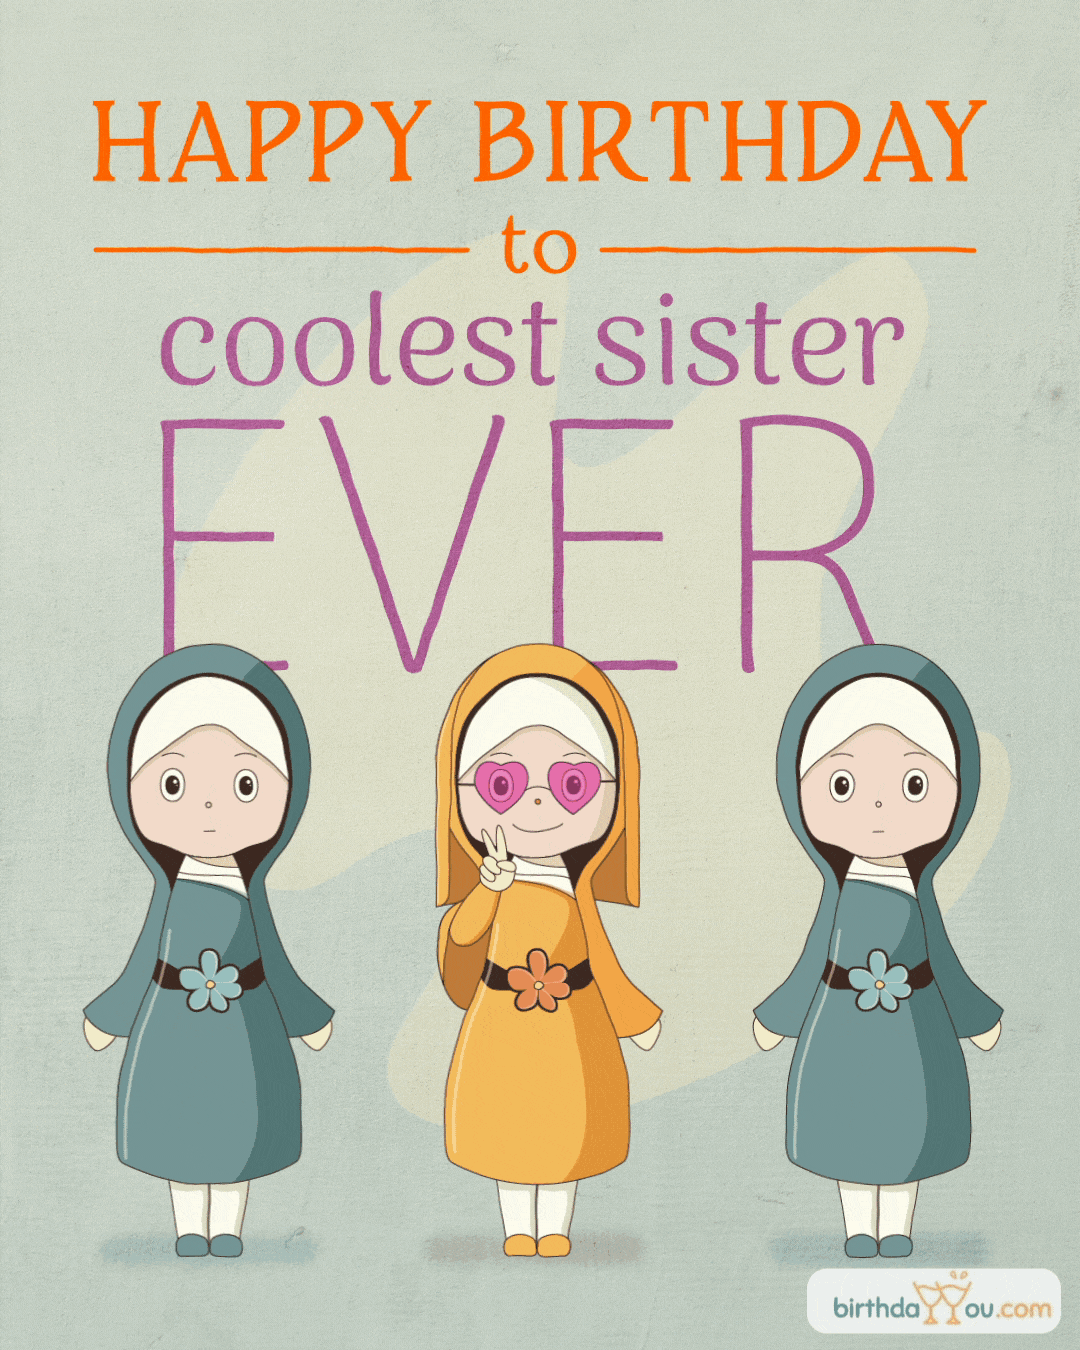 animated happy birthday images for sister